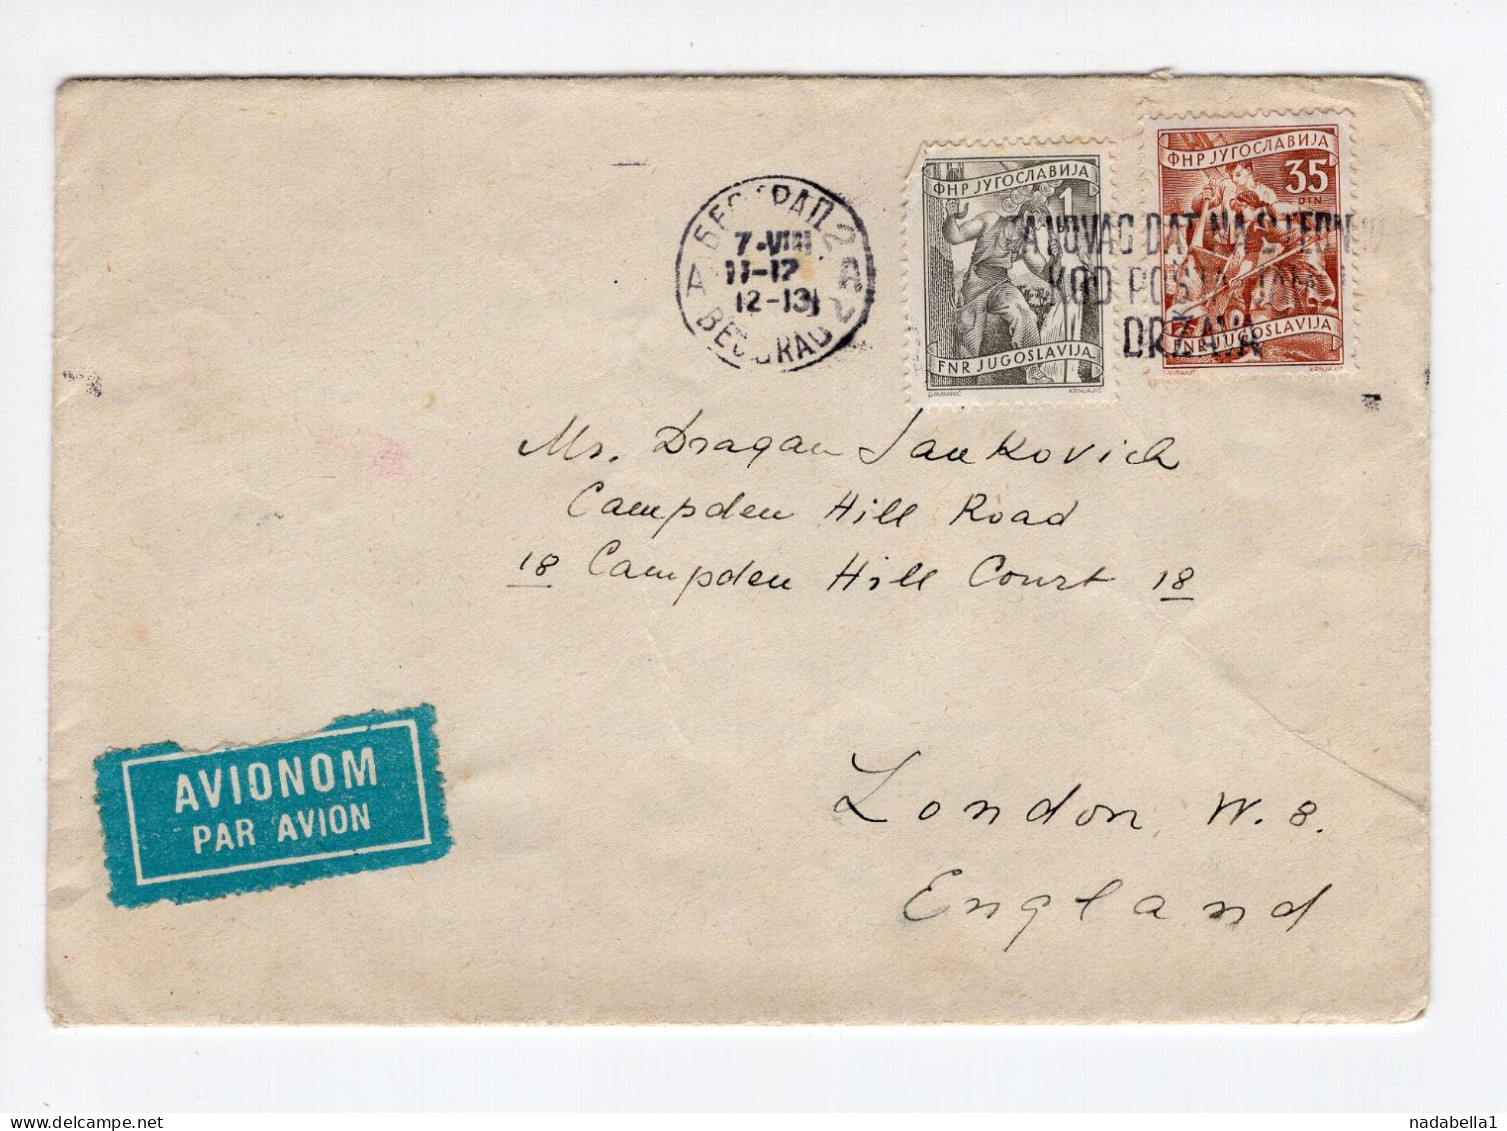 1957. YUGOSLAVIA,SERBIA,BELGRADE,AIRMAIL COVER TO LONDON,GREAT BRITAIN,LETTER INSIDE - Airmail